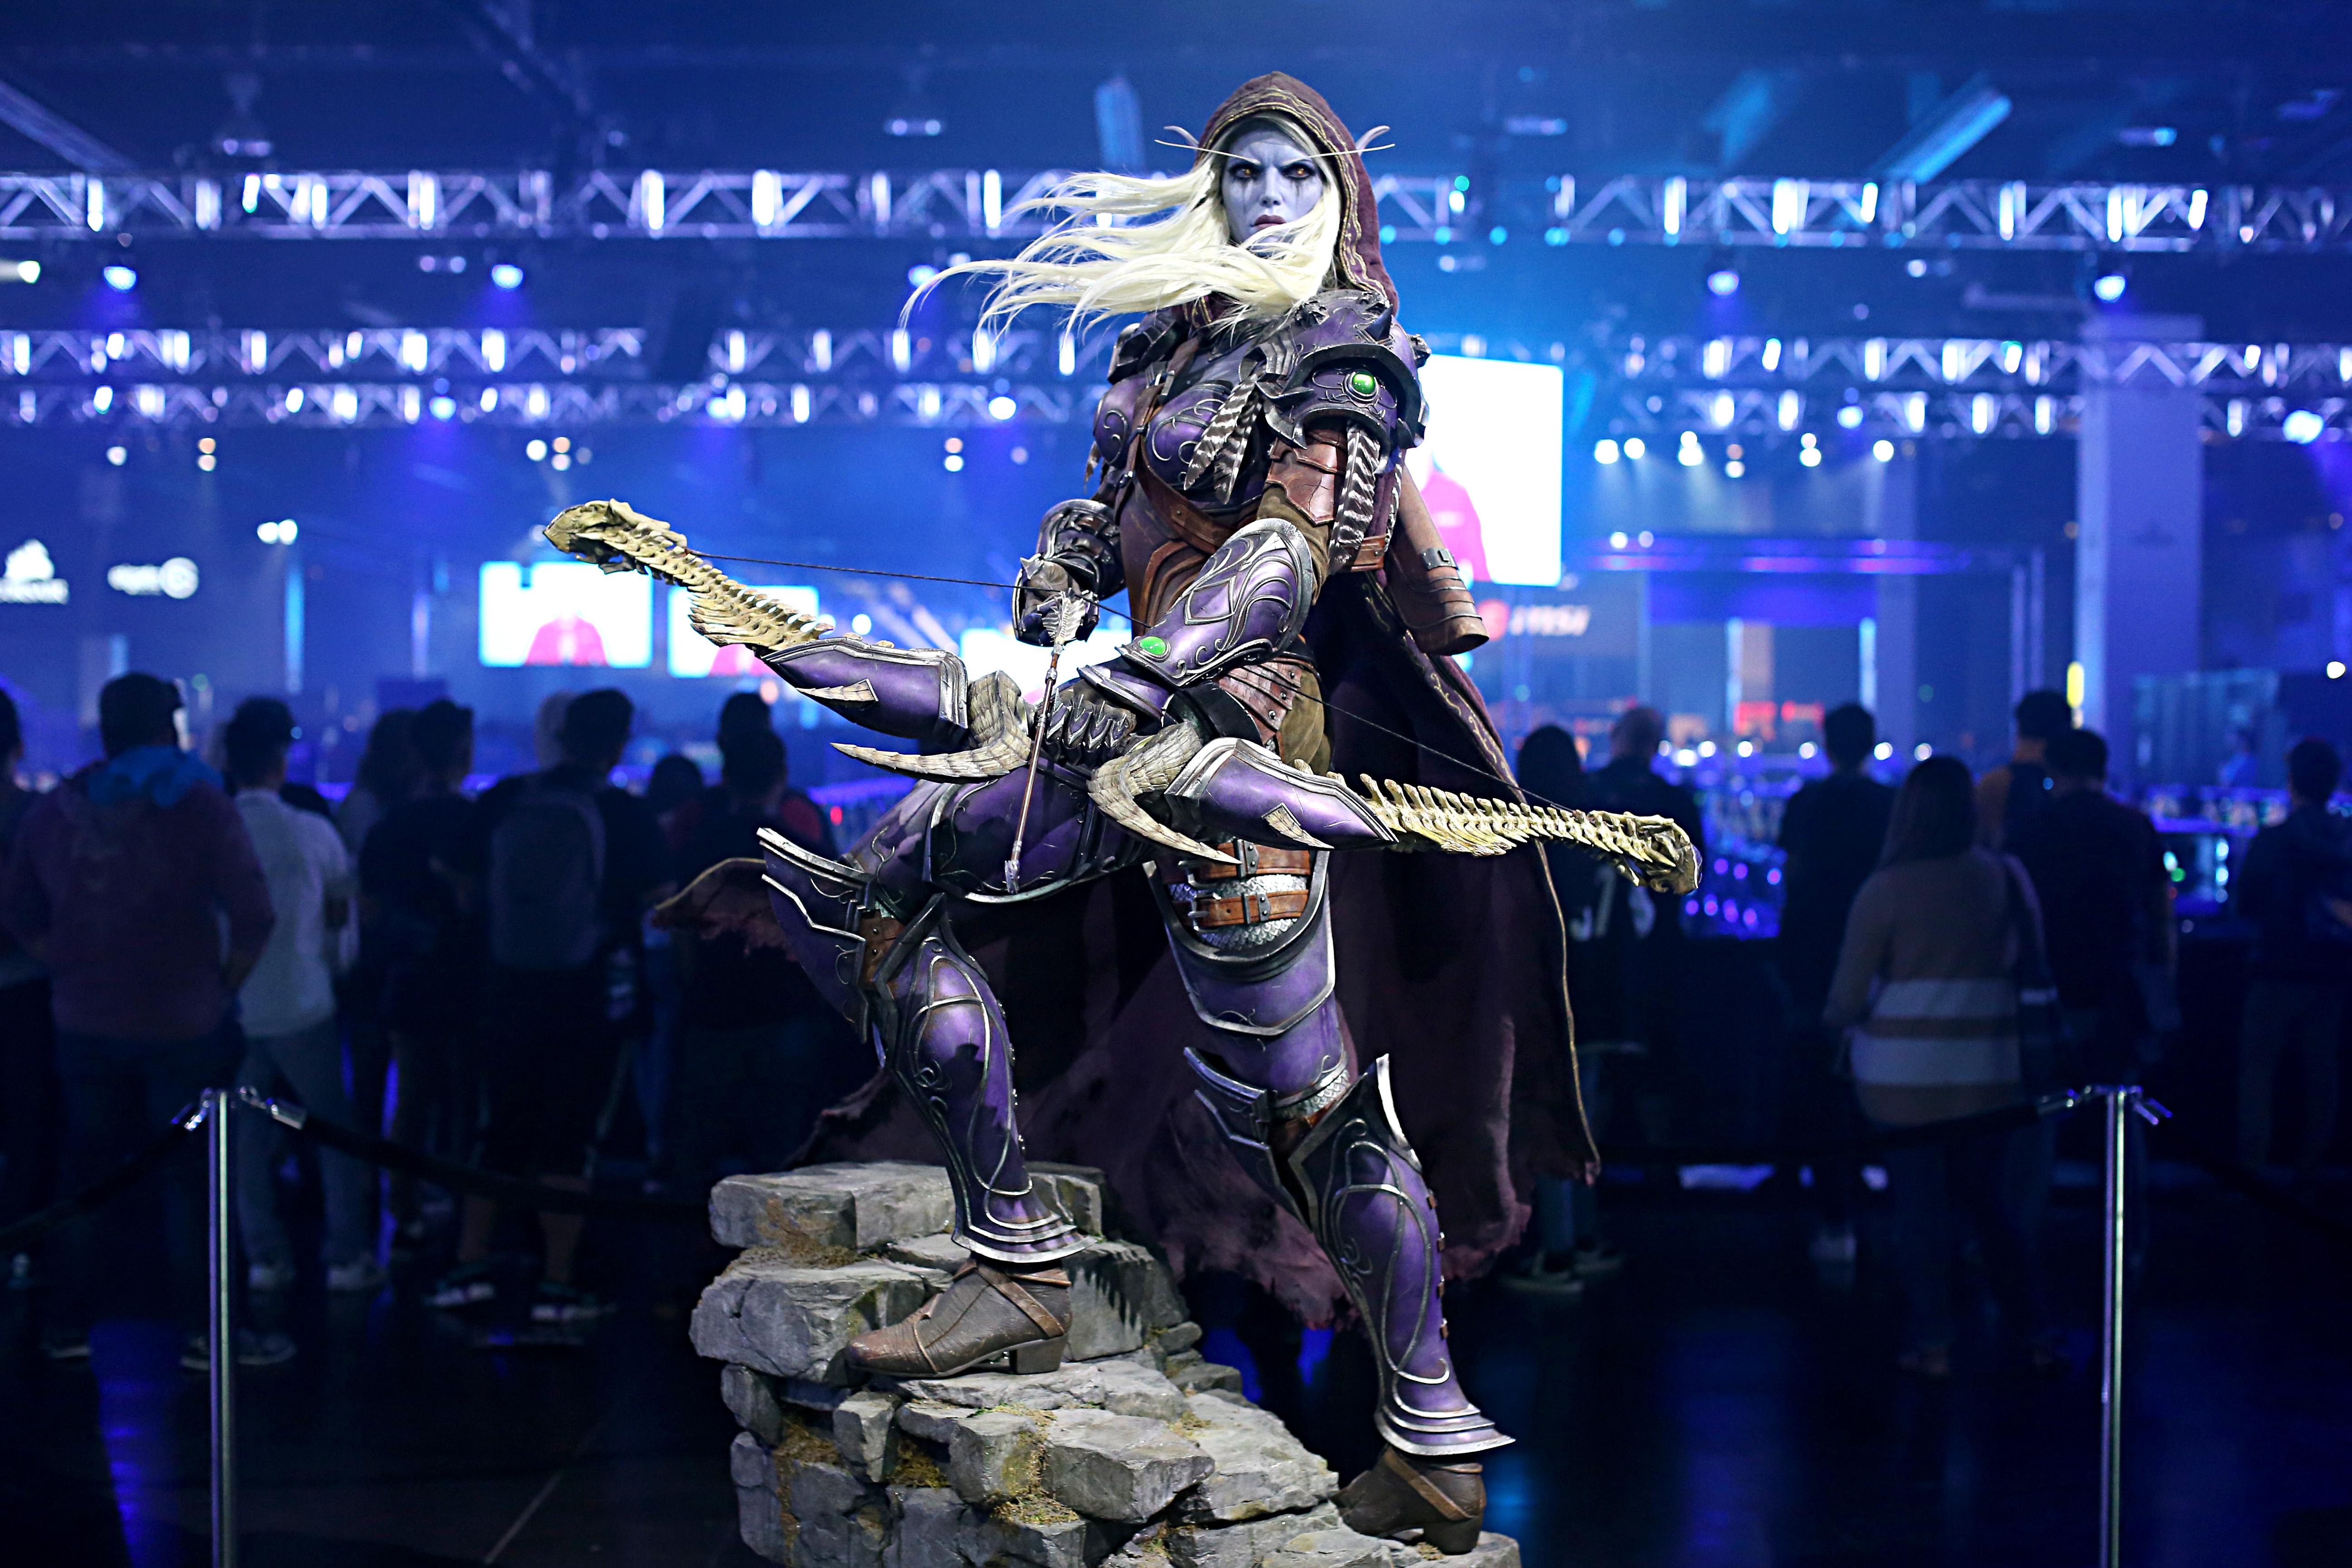 A general view of the atmosphere at BlizzCon 2019 at the Anaheim Convention Center in California on Friday.